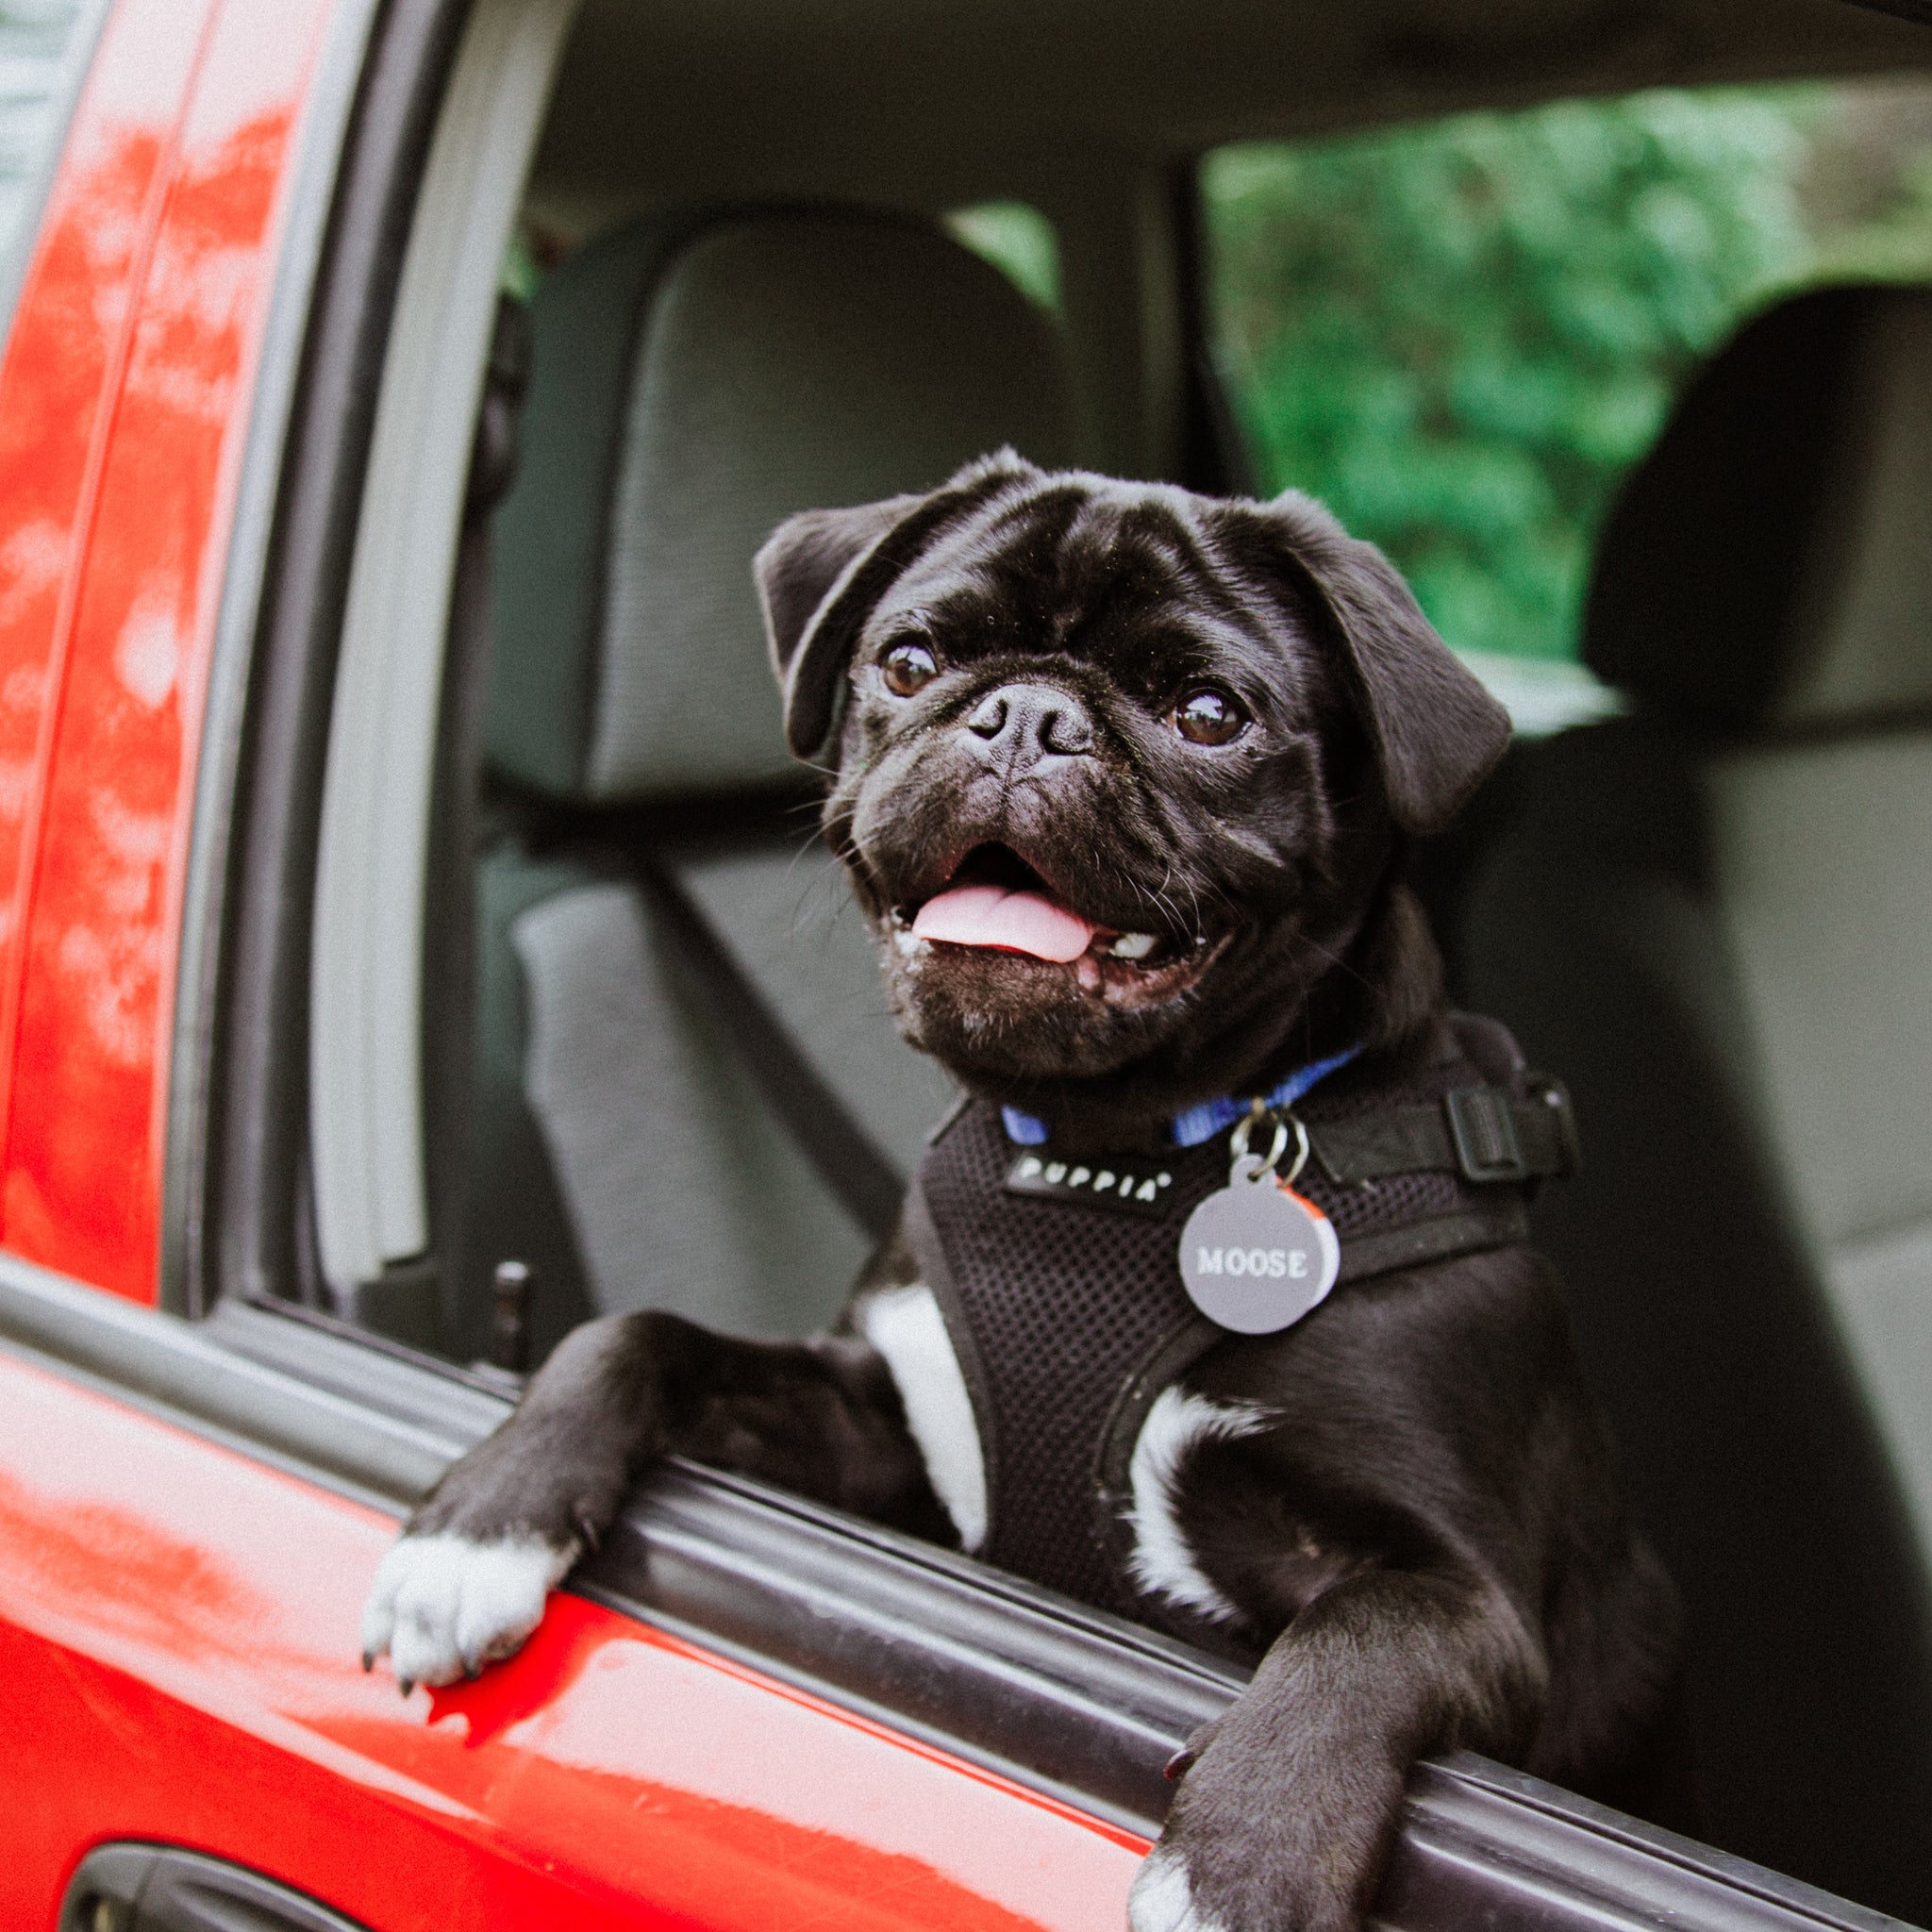 A single dose of cannabidiol (CBD) positively influences measures of stress in dogs during separation and car travel